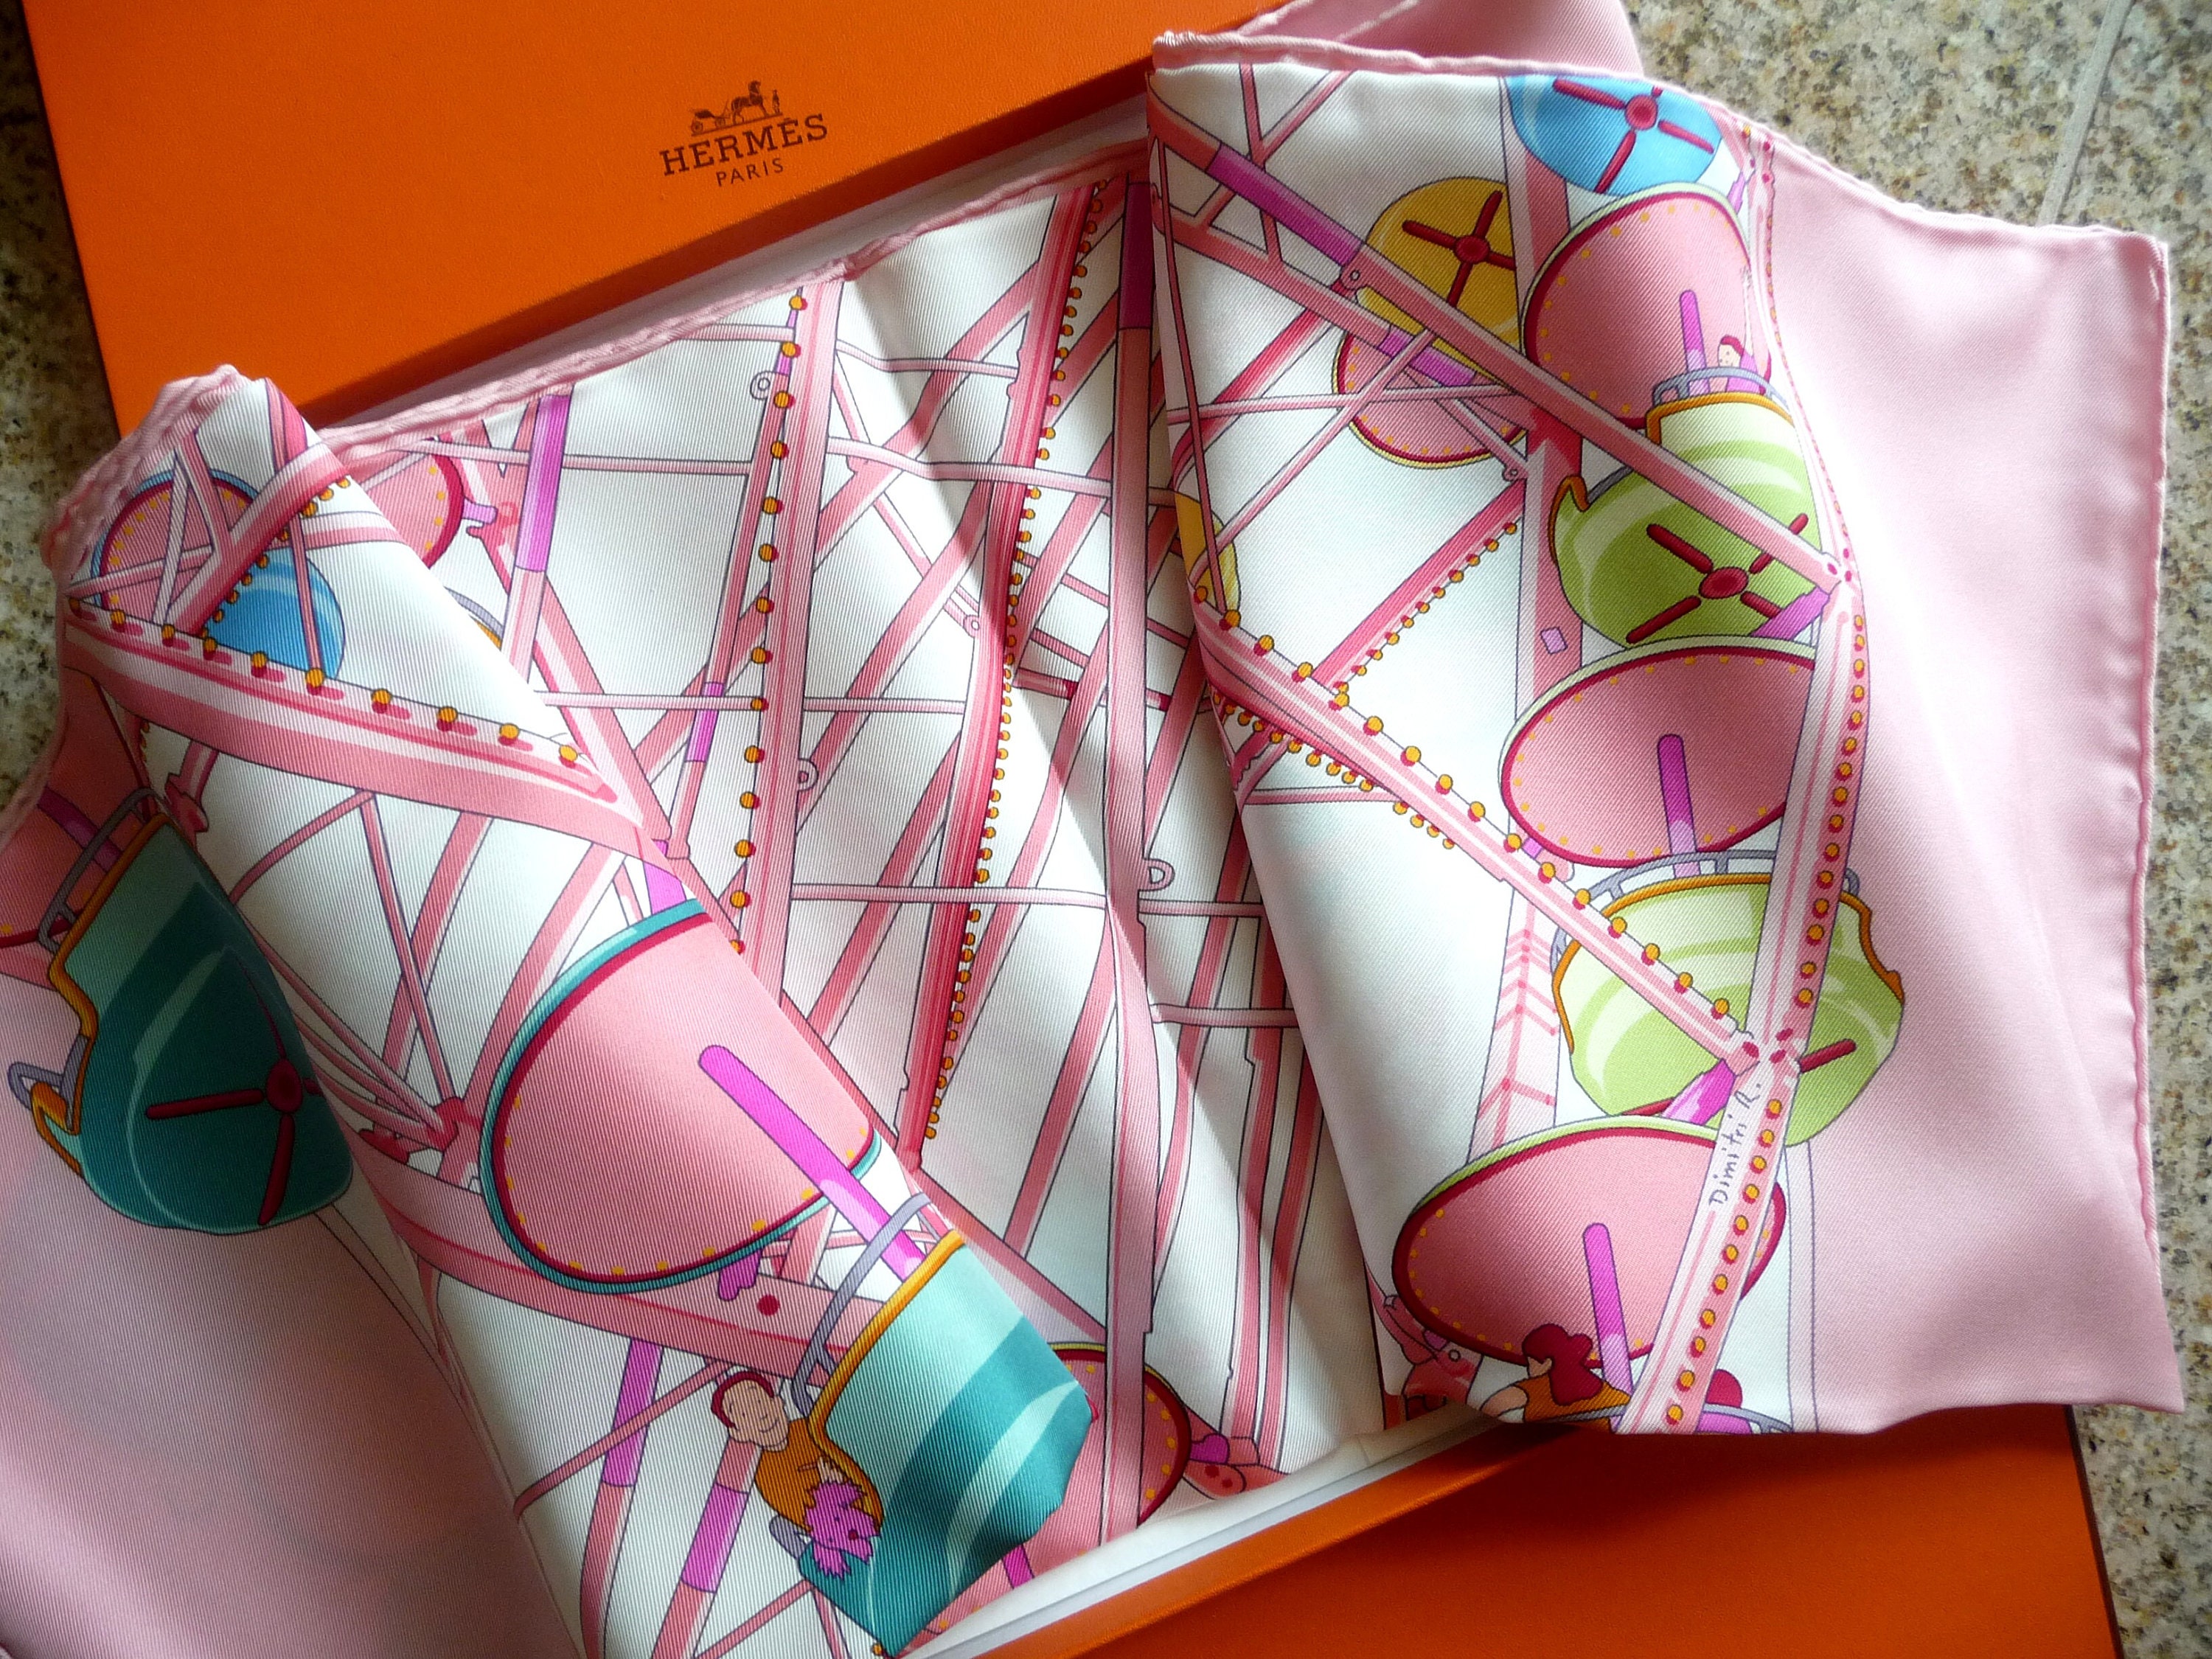 hermes-twilly-scarf-image-result-for-ways-to-use-the-belt-square-on-bag